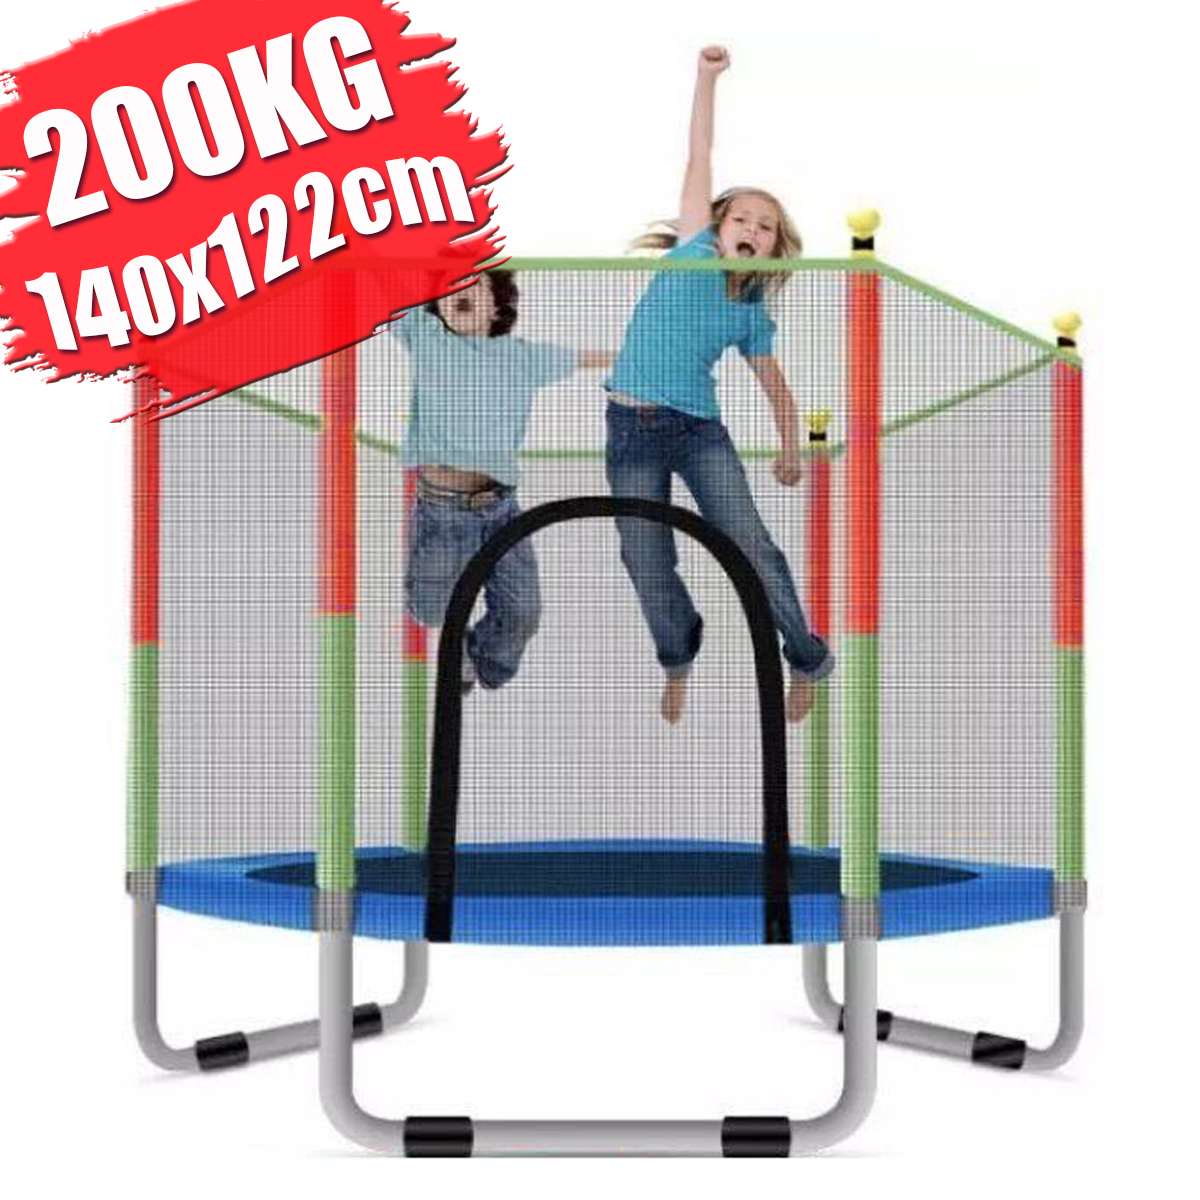 Mini Trampoline 55.12inch Round Kids Enclosure Net Pad Rebounder Outdoor Exercise Home Toys Jumping Bed Max Load 200 KG